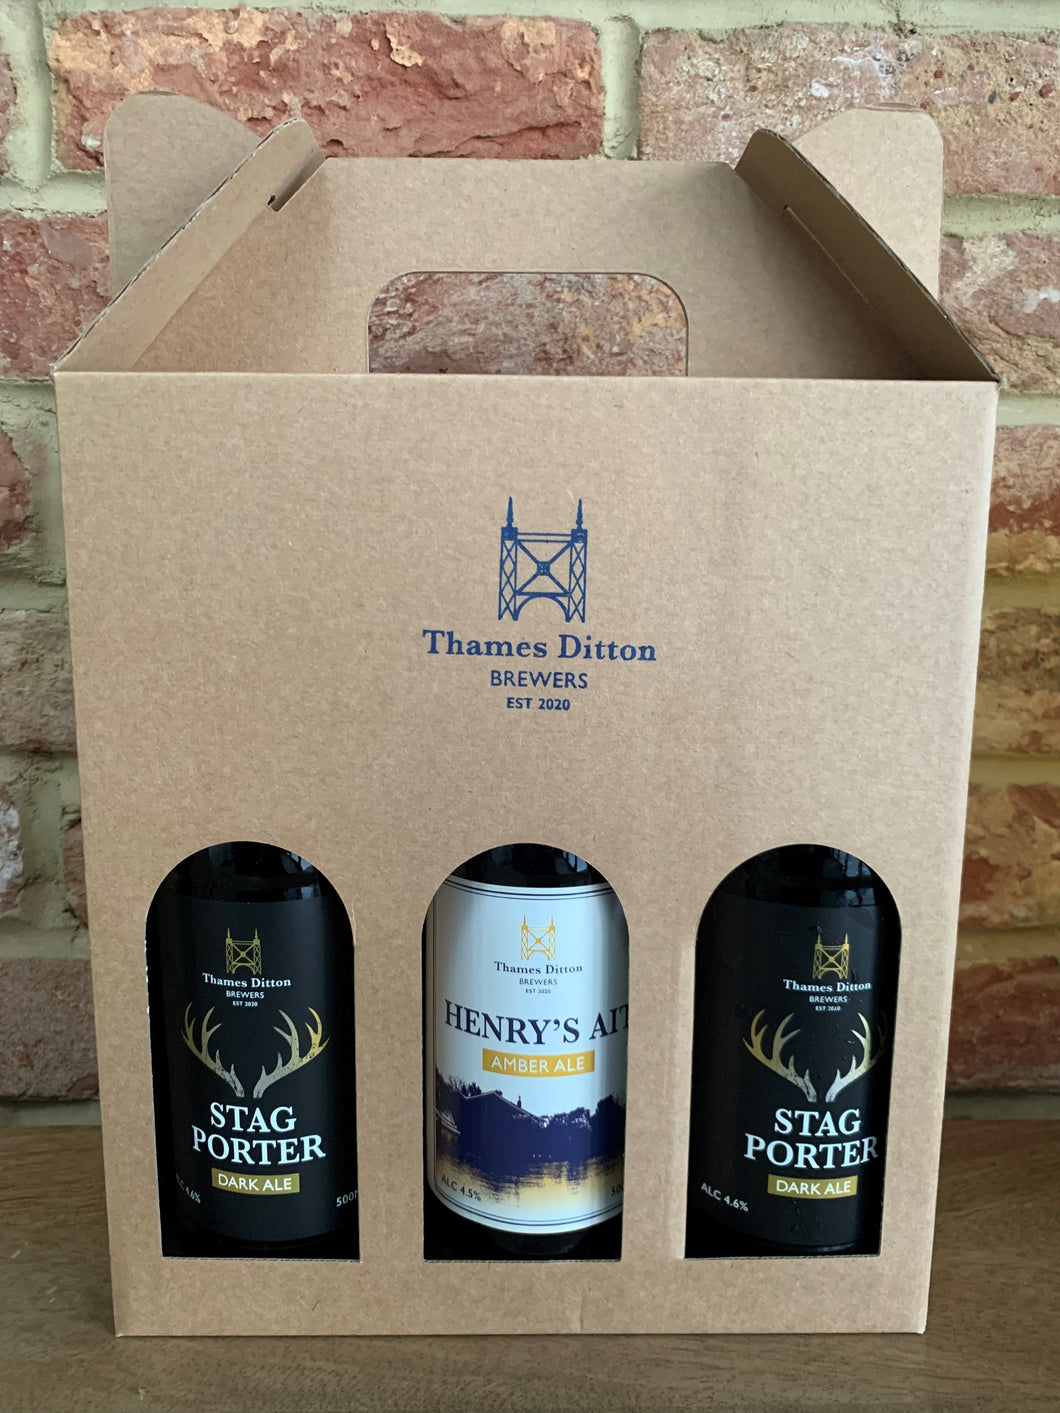 2 x 500ml Stag Porter & 1 x 500ml Henry's Ait in a Gift Presentation Box